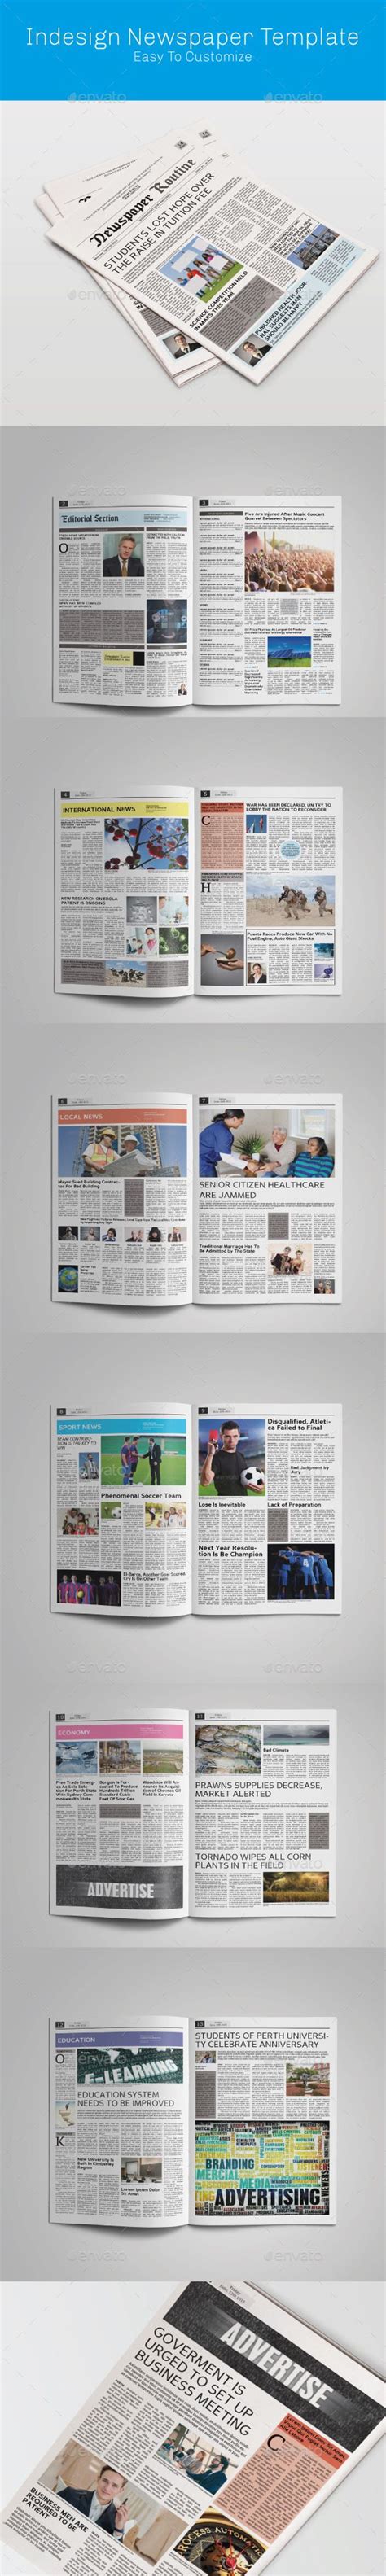 See more ideas about newspaper design, tabloid newspapers, newspaper. Tabloid Indesign Newspaper | Newspaper template ...